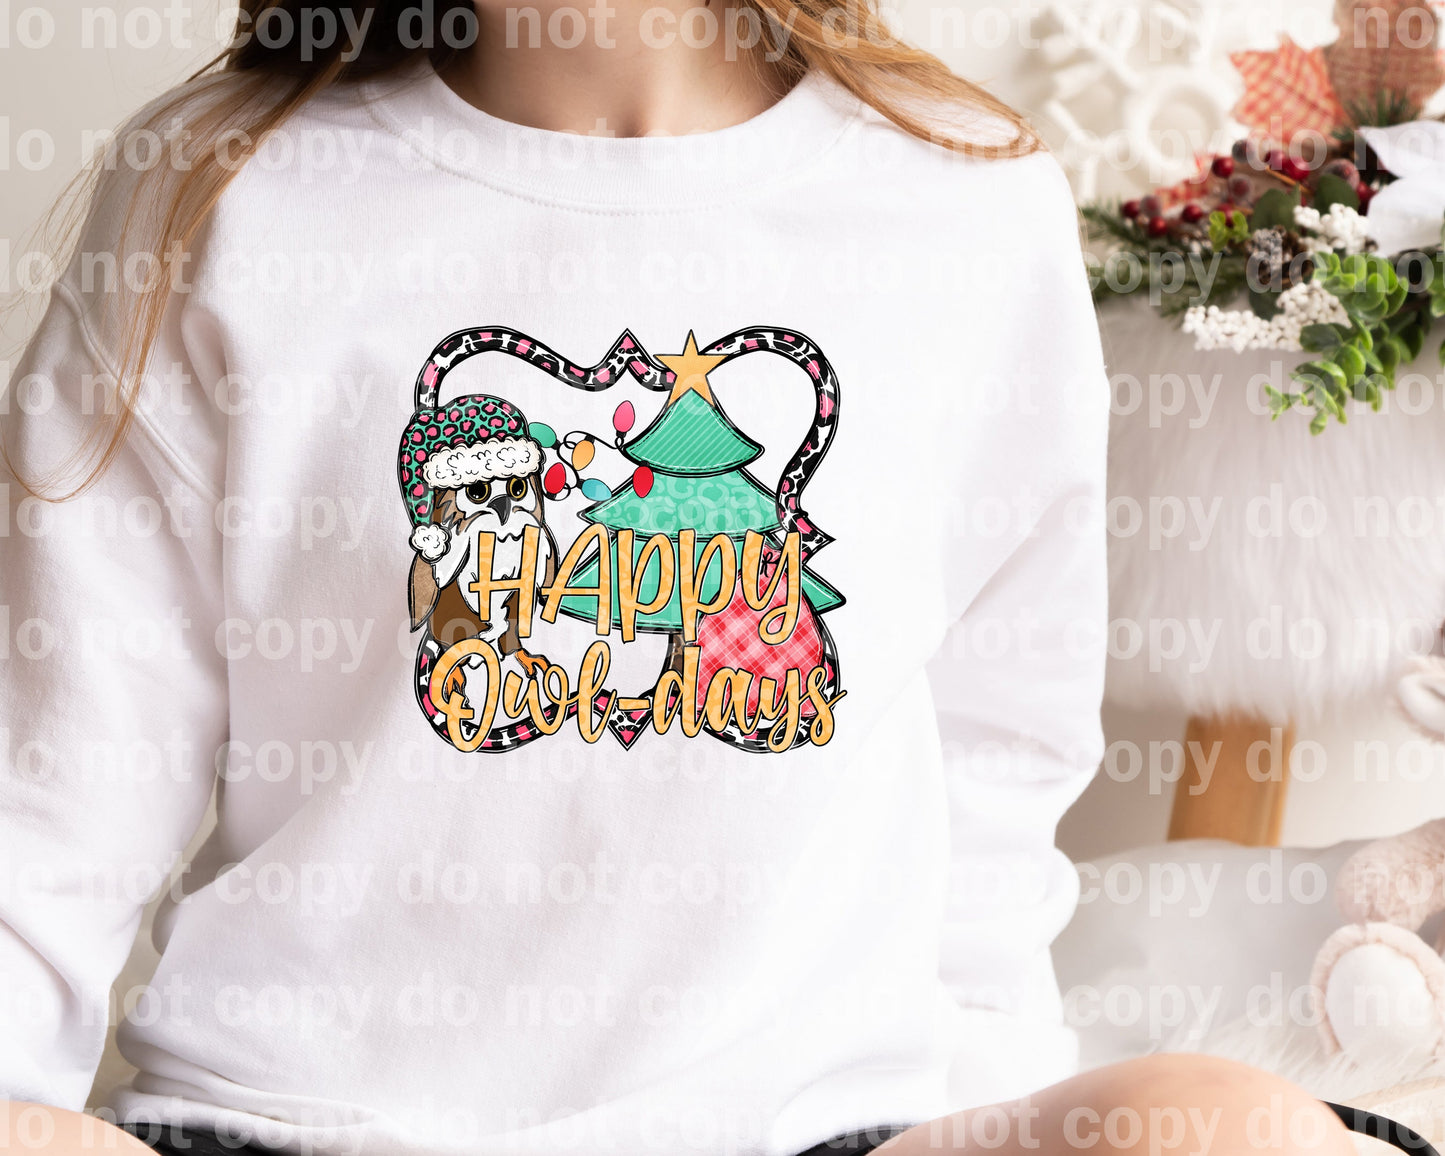 Happy Owl-days Dream Print or Sublimation Print